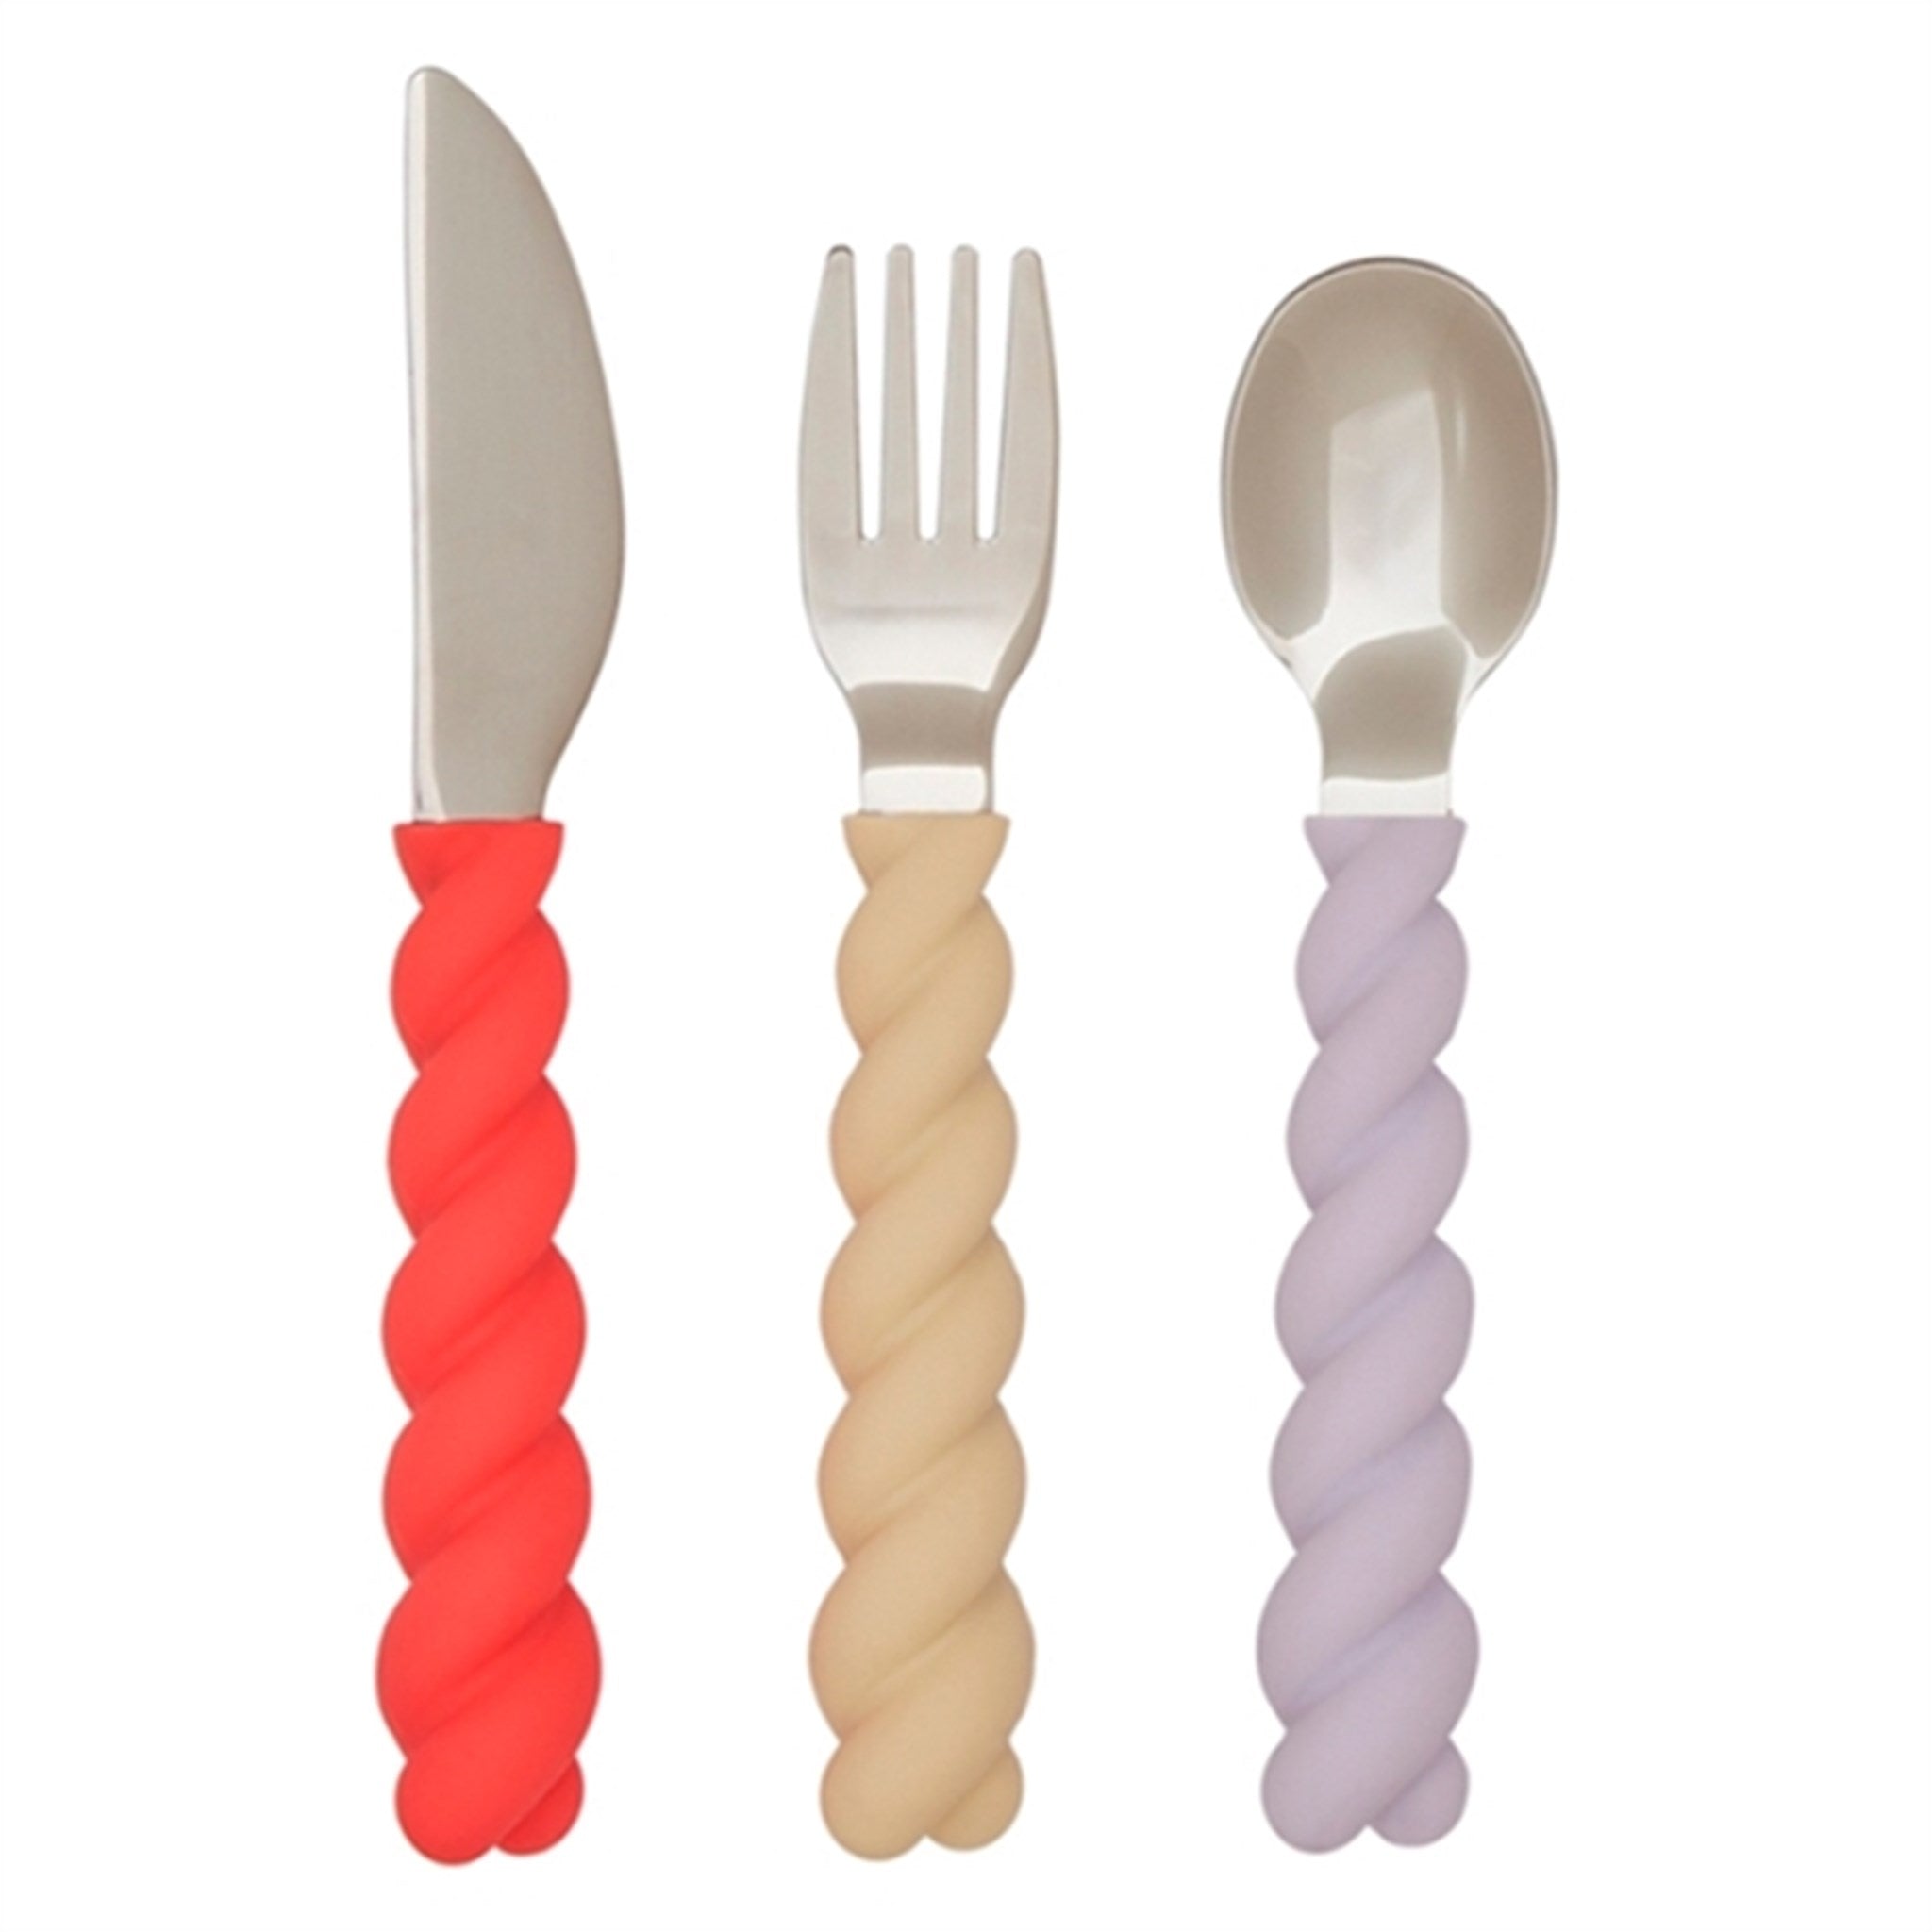 OYOY Cutlery Set Mellow 3-pack Lavender/Vanilla/Cherry Red